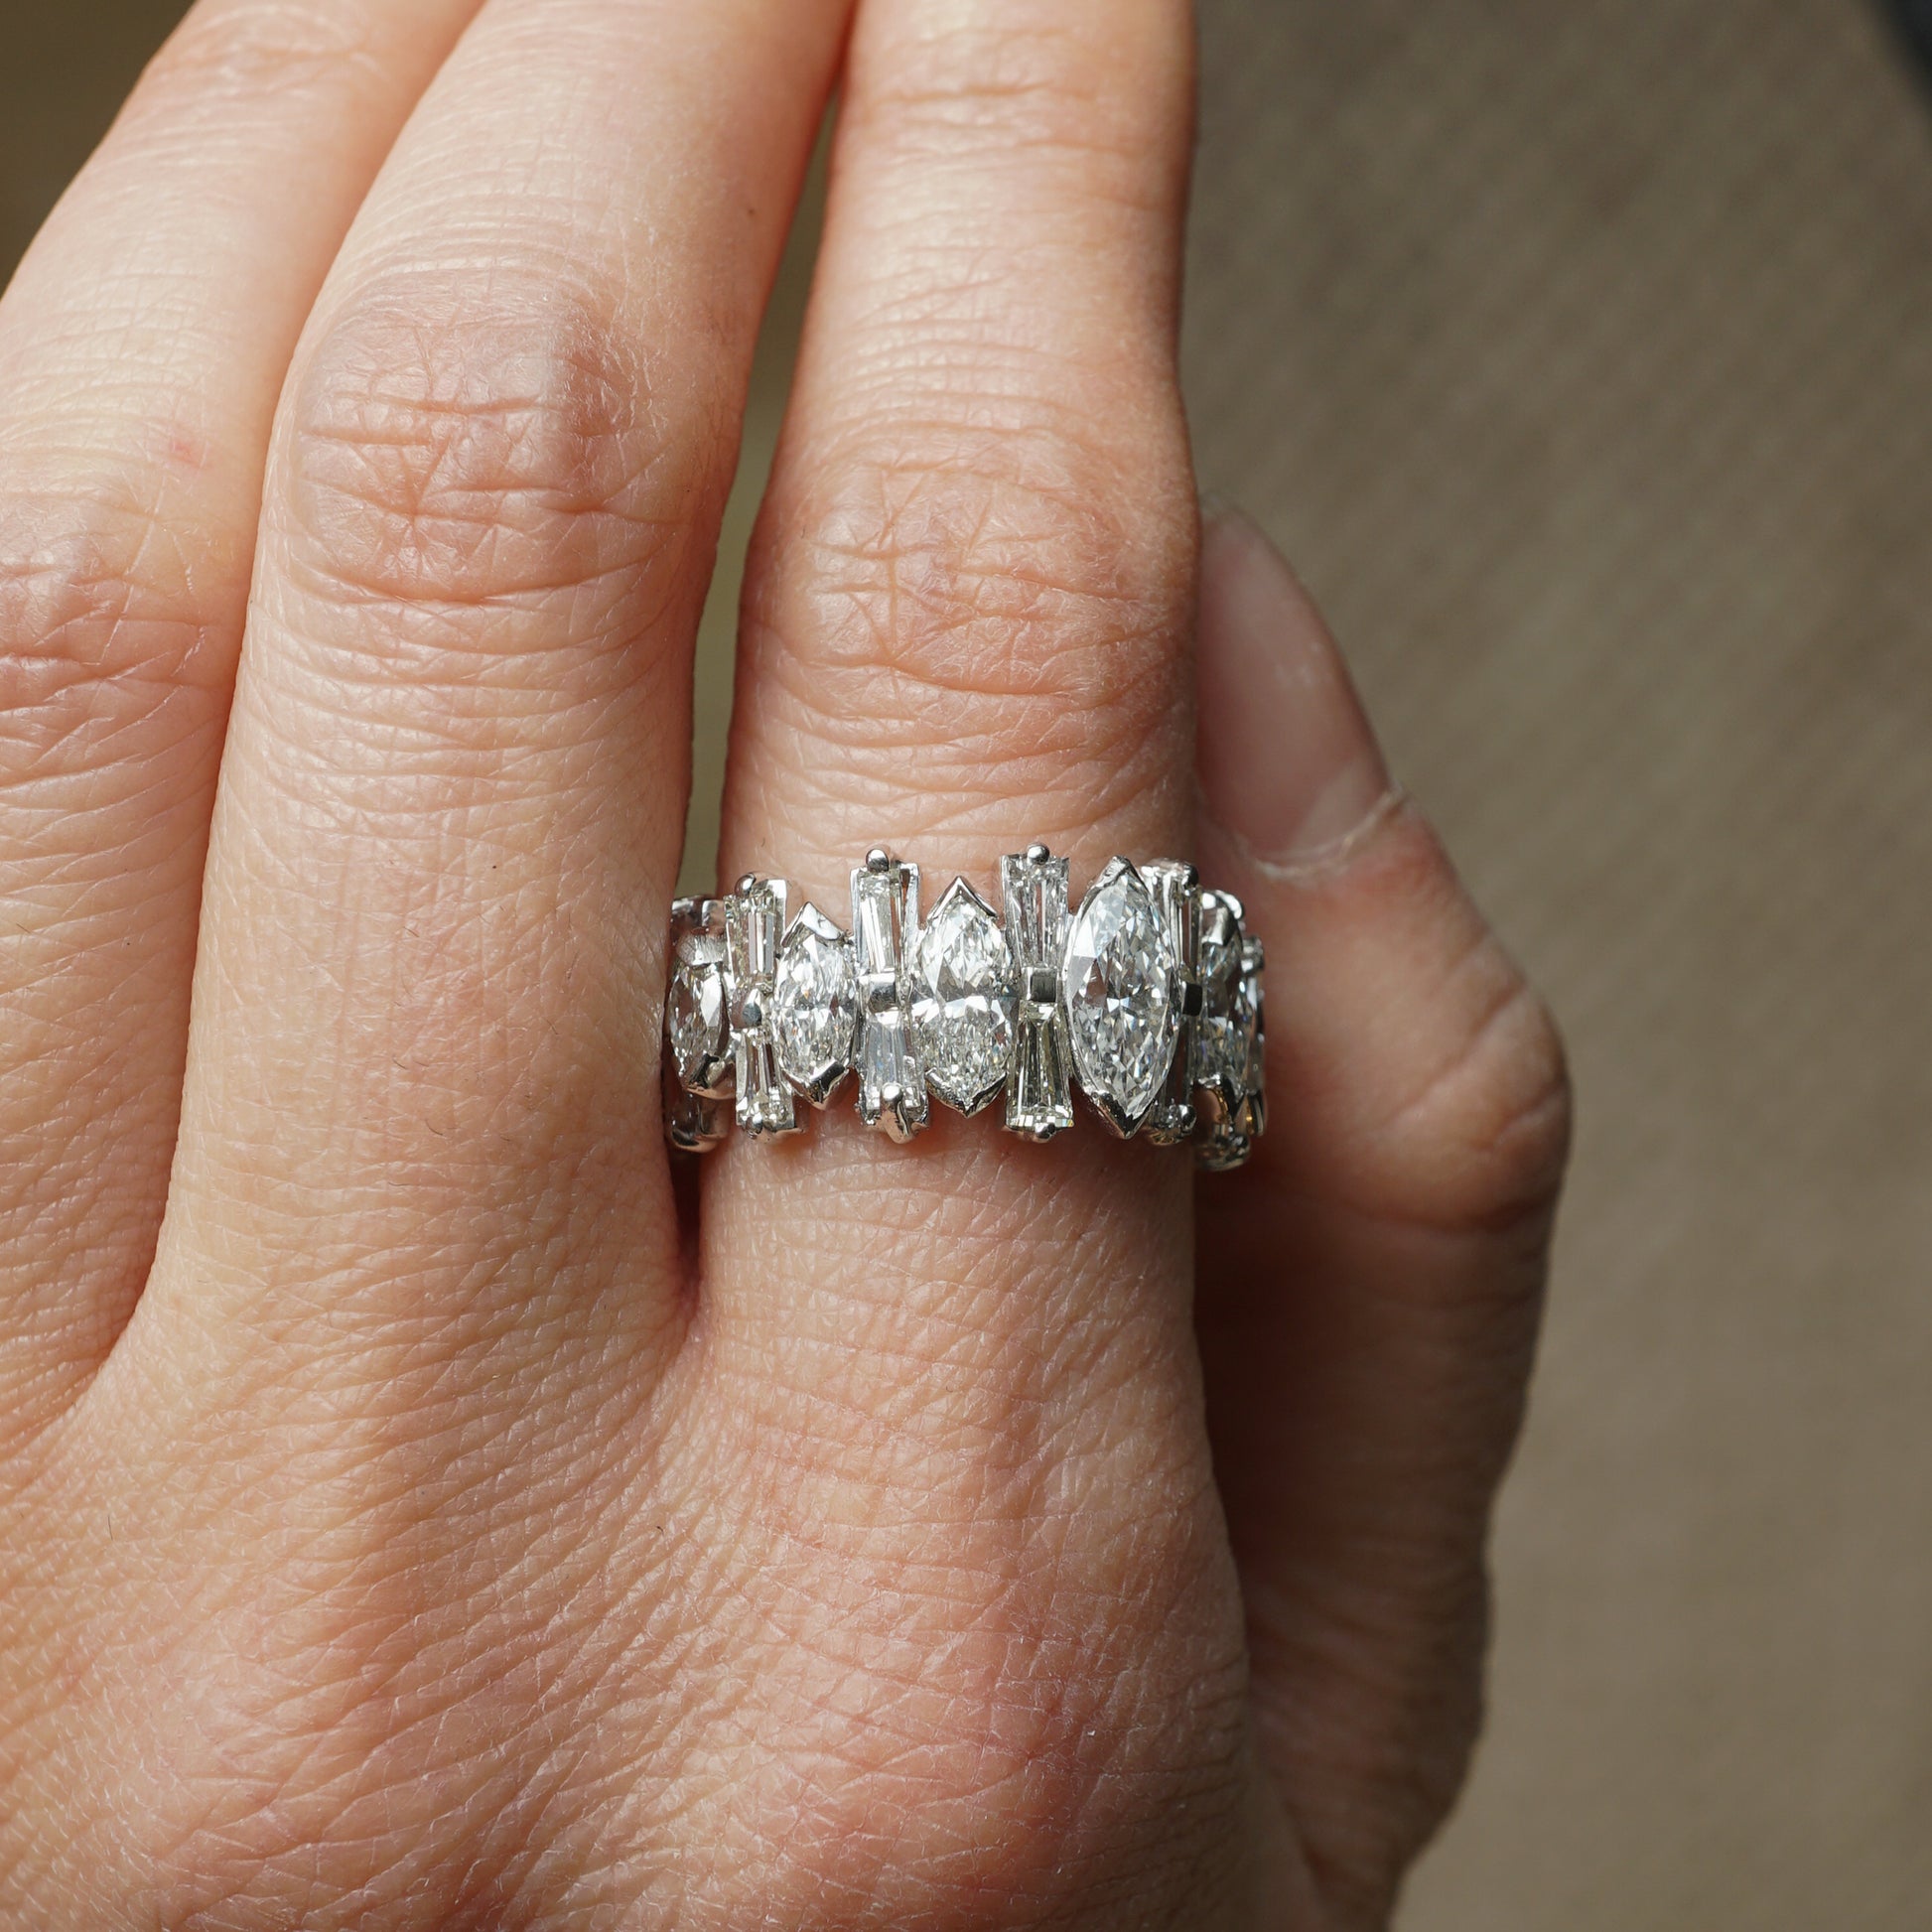 Marquise & Baguette Cut Diamond Eternity Ring in PlatinumComposition: PlatinumRing Size: 7Total Diamond Weight: 5.05 ctTotal Gram Weight: 9.5 g